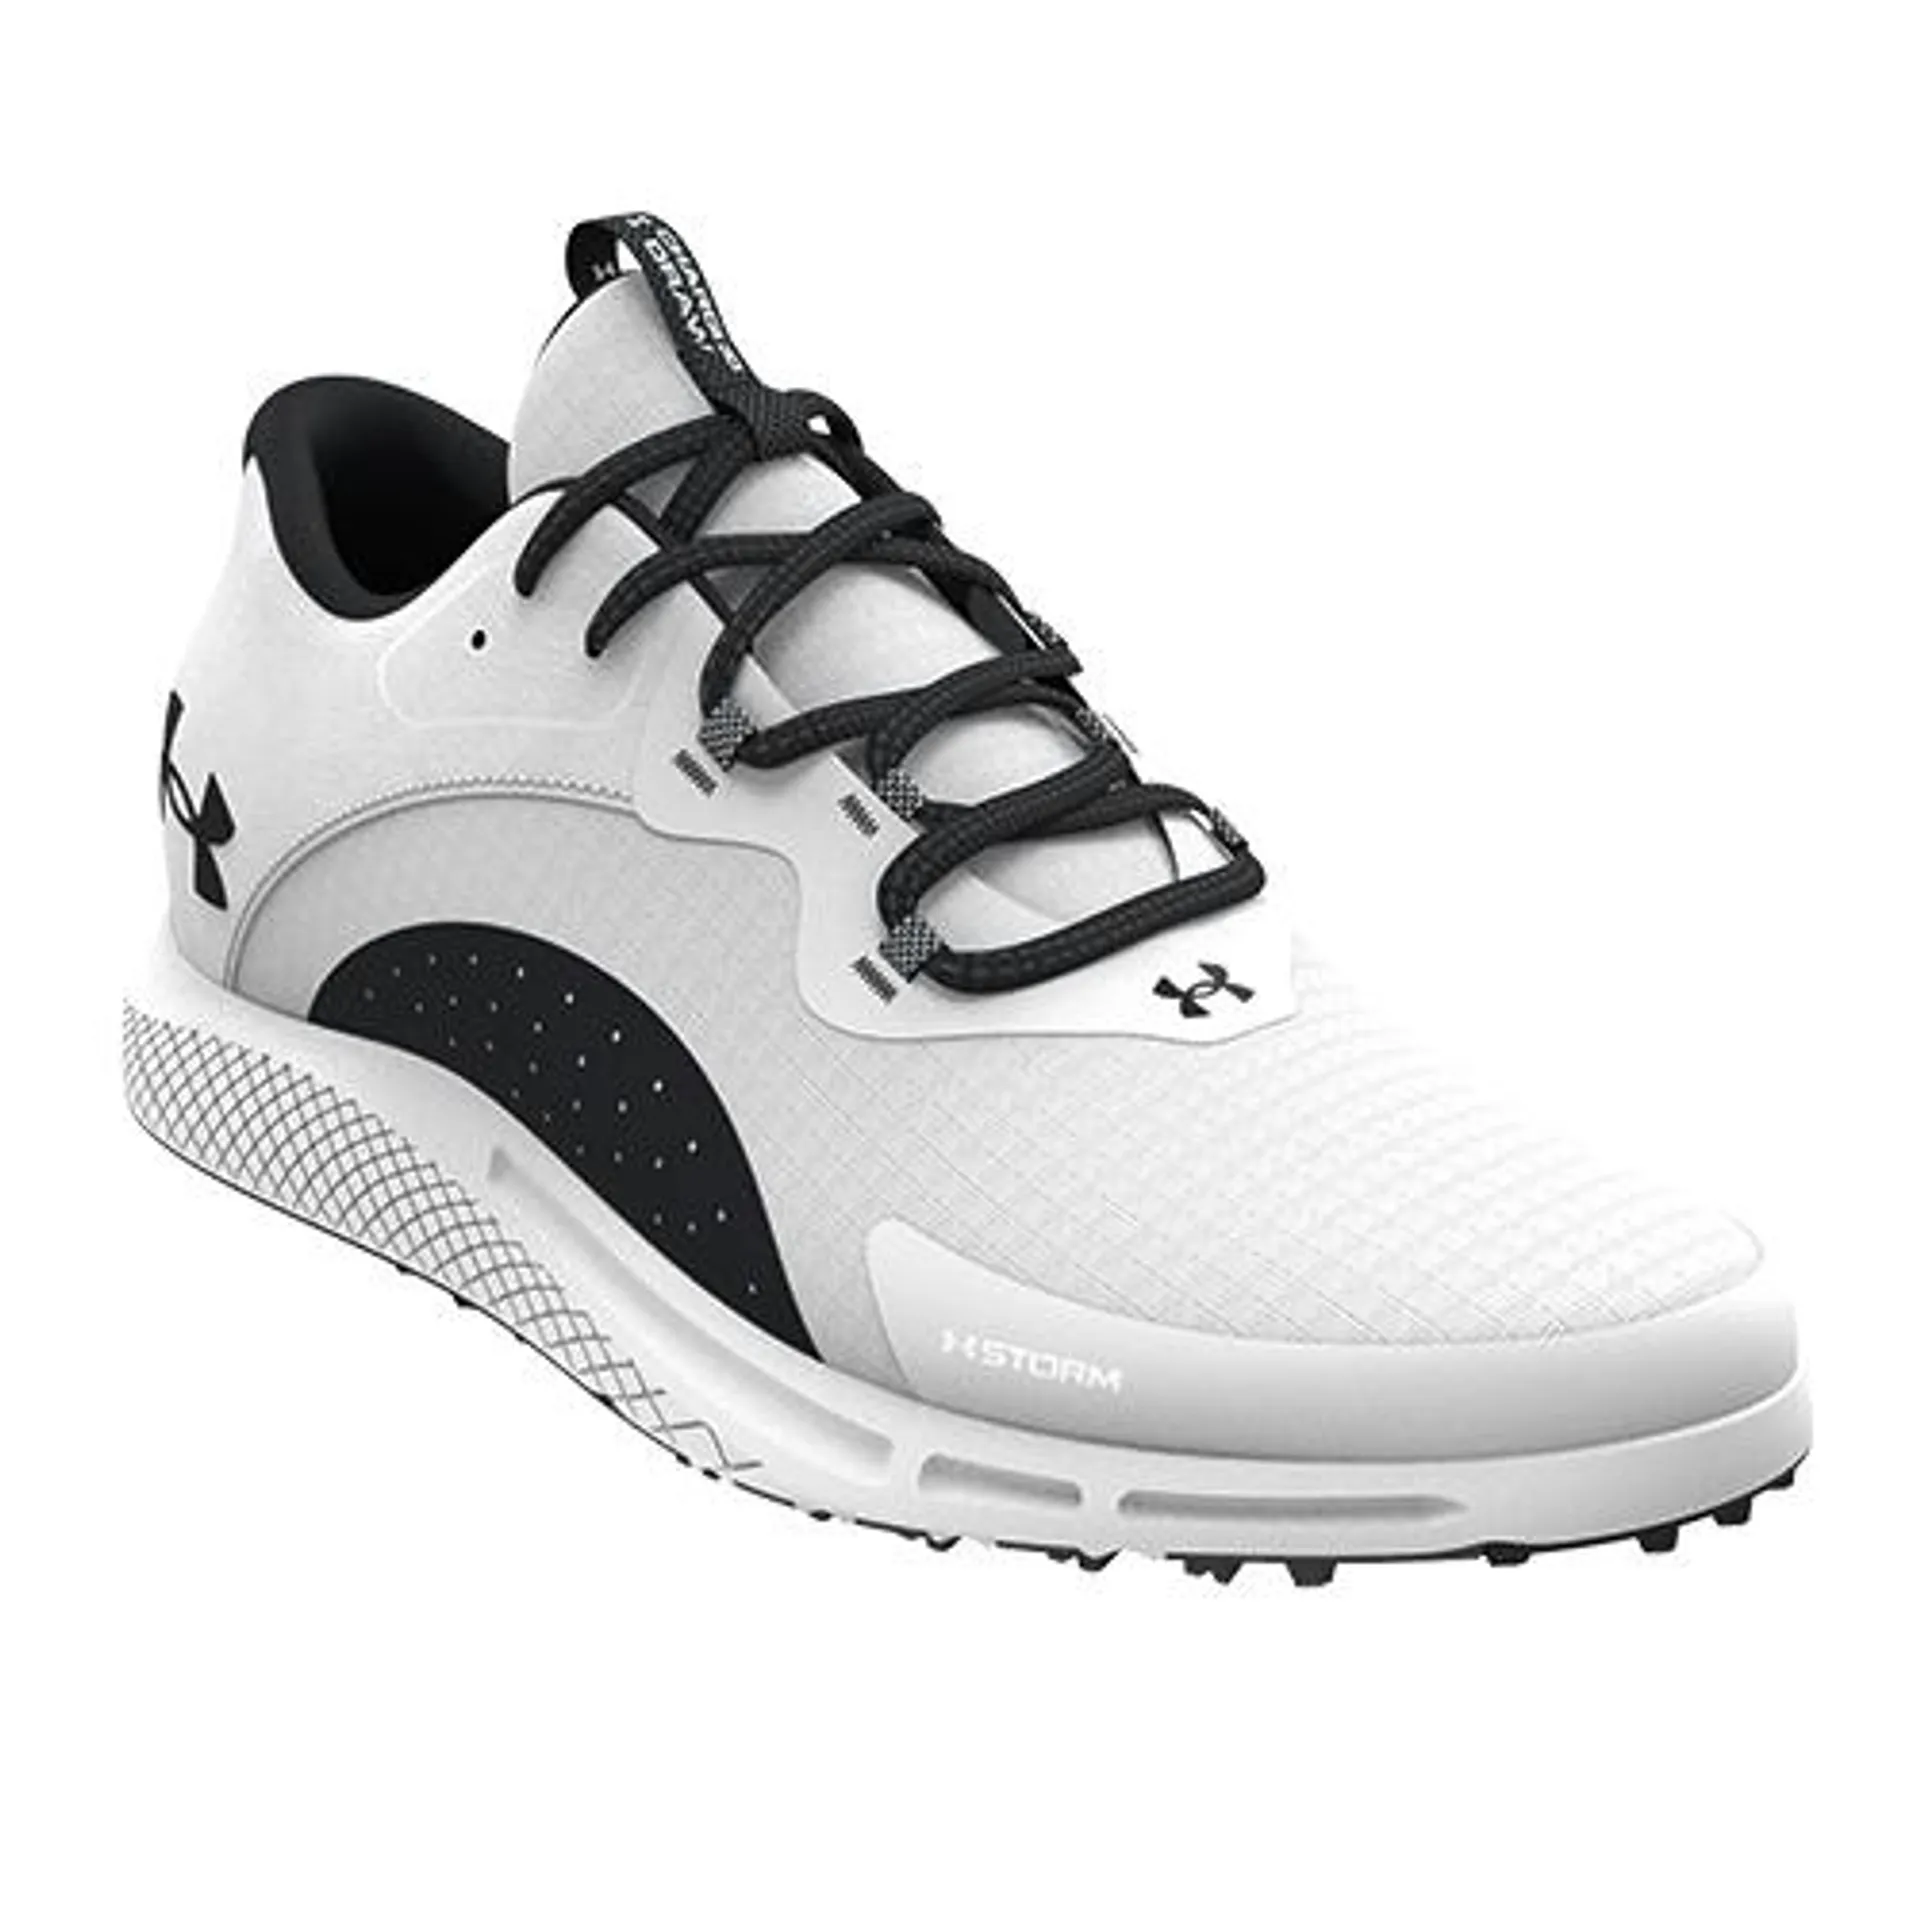 Under Armour Charged Draw Shoes – White 3026399-100